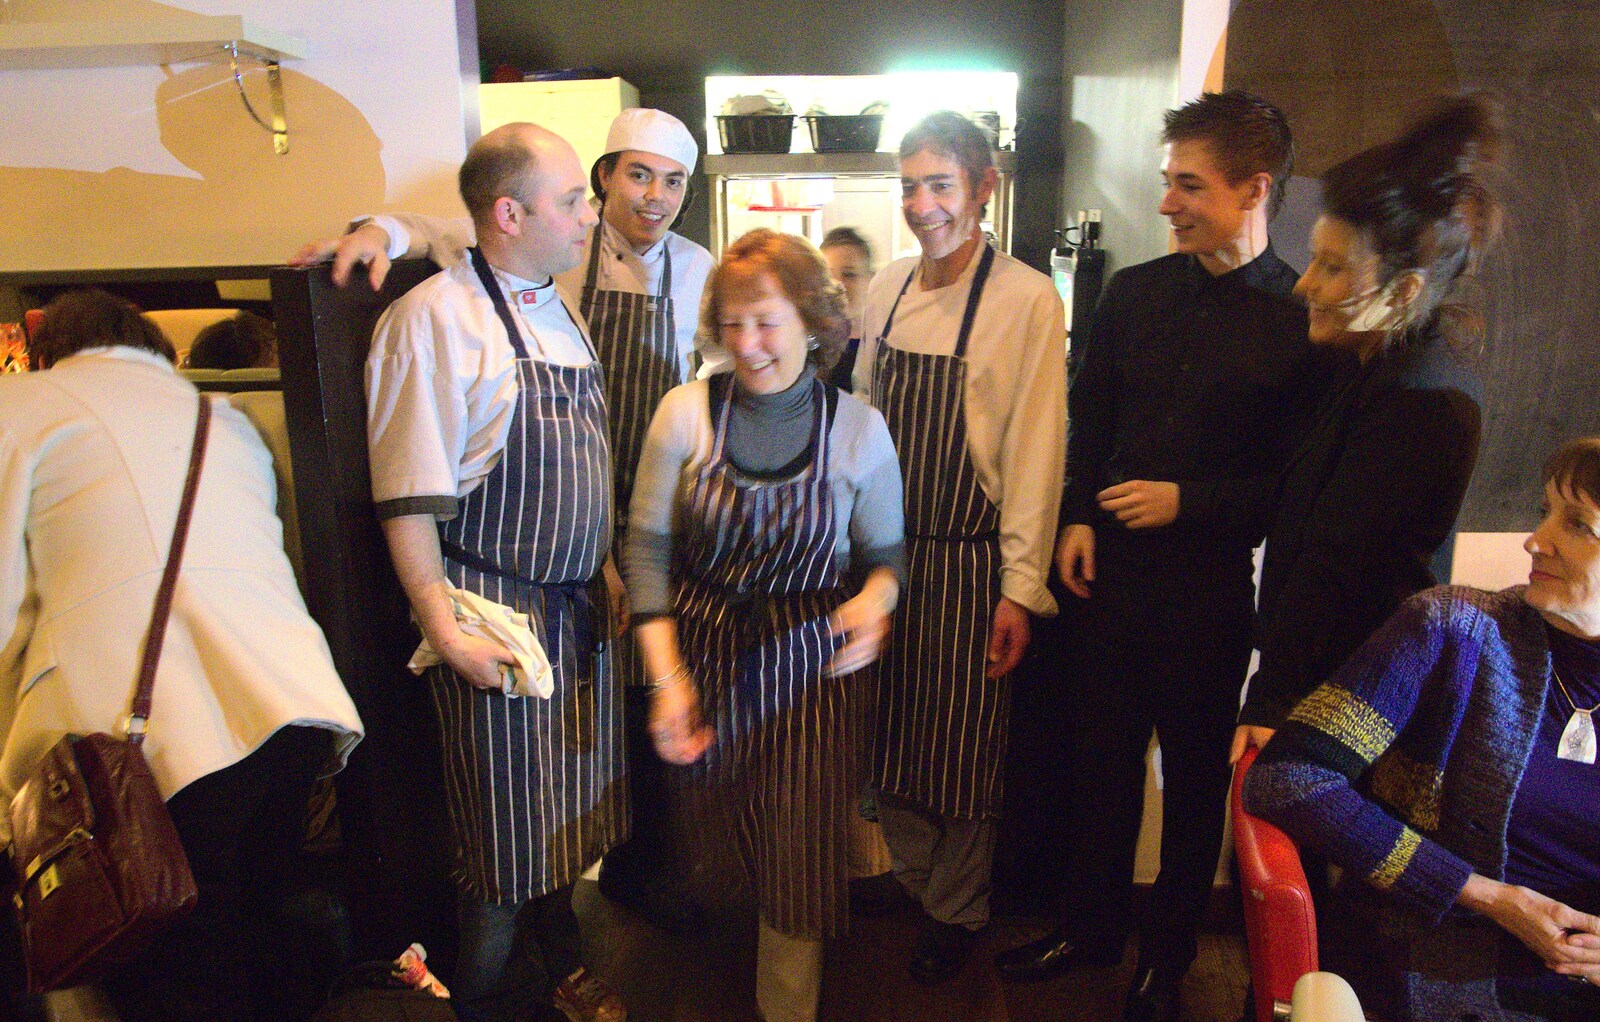 The kitchen and waiting team get some thanks from Nom Nom's Popup Restaurant, Dublin, Ireland - 7th January 2012